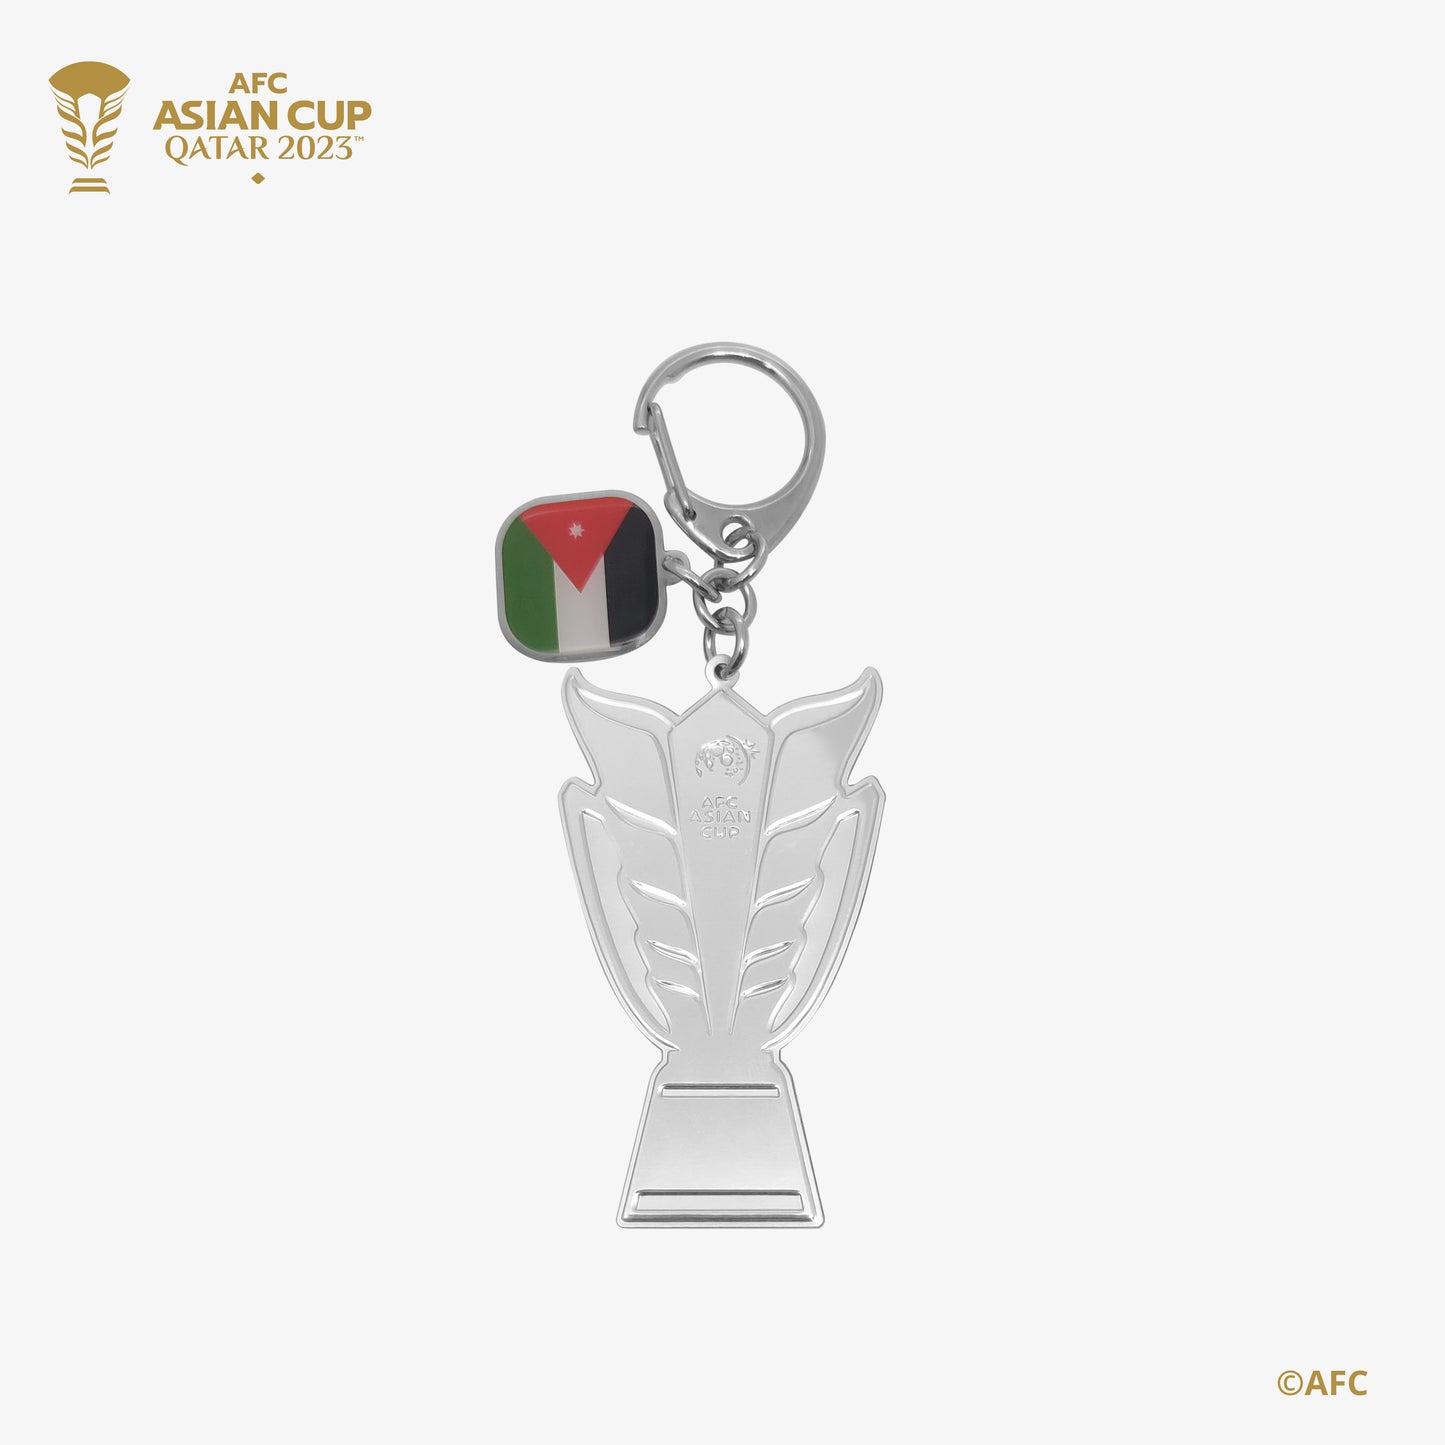 AFC Asian Cup 2D Trophy Keychain with Country Flag - Jordan